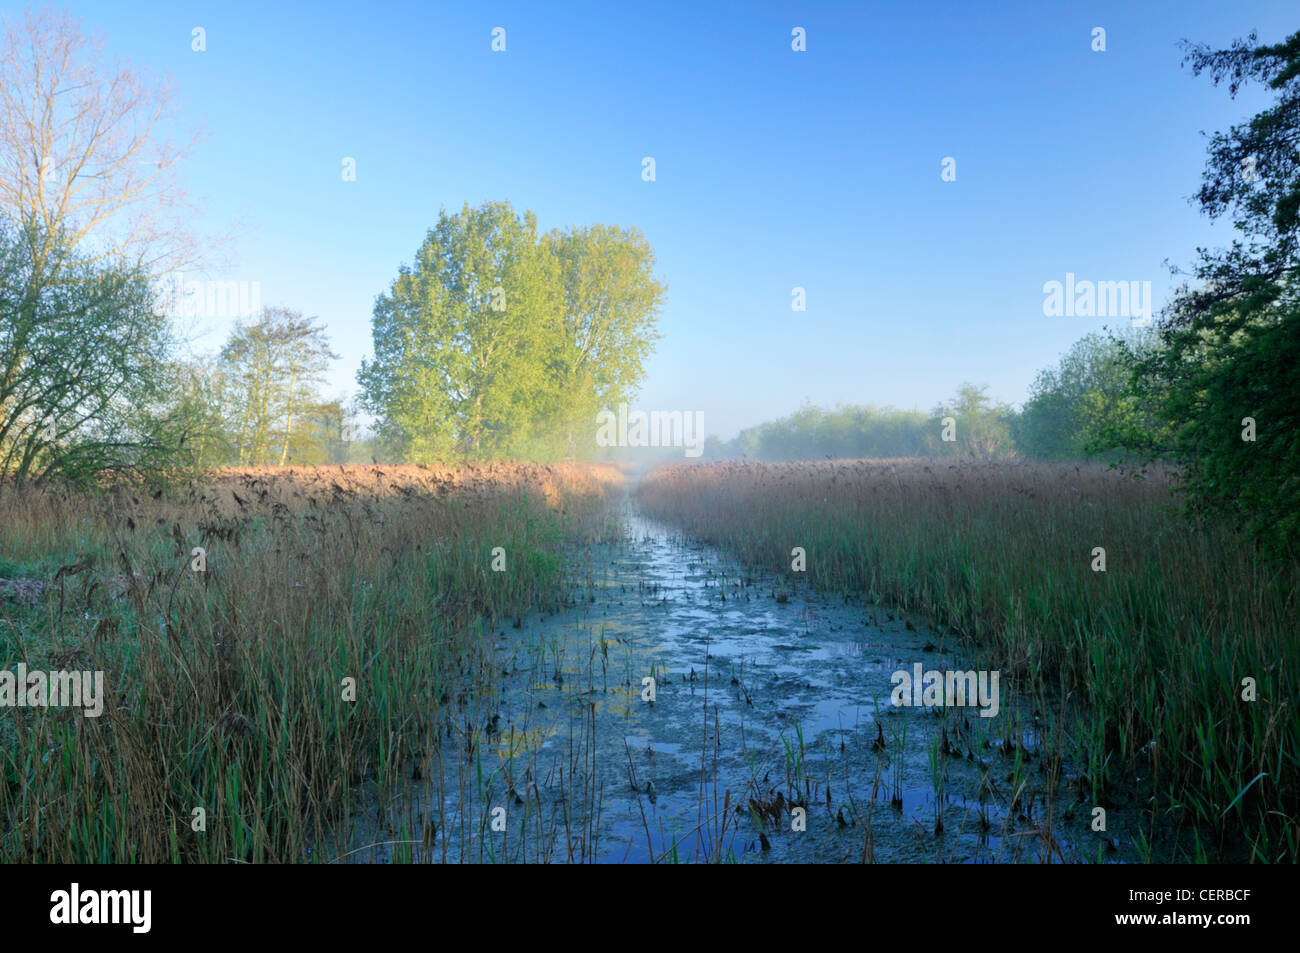 Reedbeds at Fowlmere, a RSPB (The Royal Society for the Protection of Birds) Nature Reserve. Stock Photo